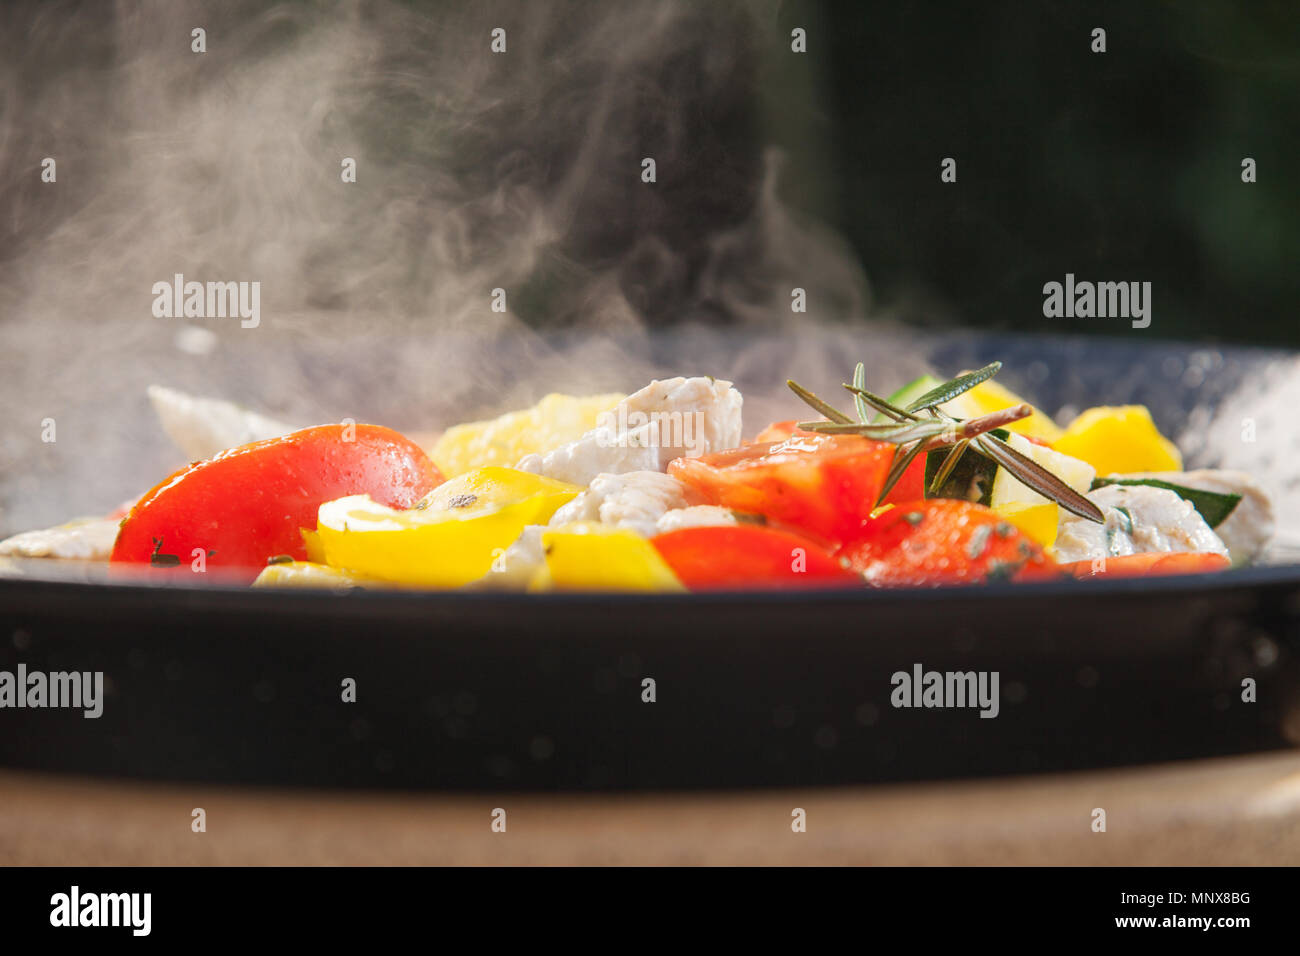 https://c8.alamy.com/comp/MNX8BG/meat-sweet-pepper-and-tomatoes-in-a-hot-pan-coooking-outside-in-the-sun-MNX8BG.jpg